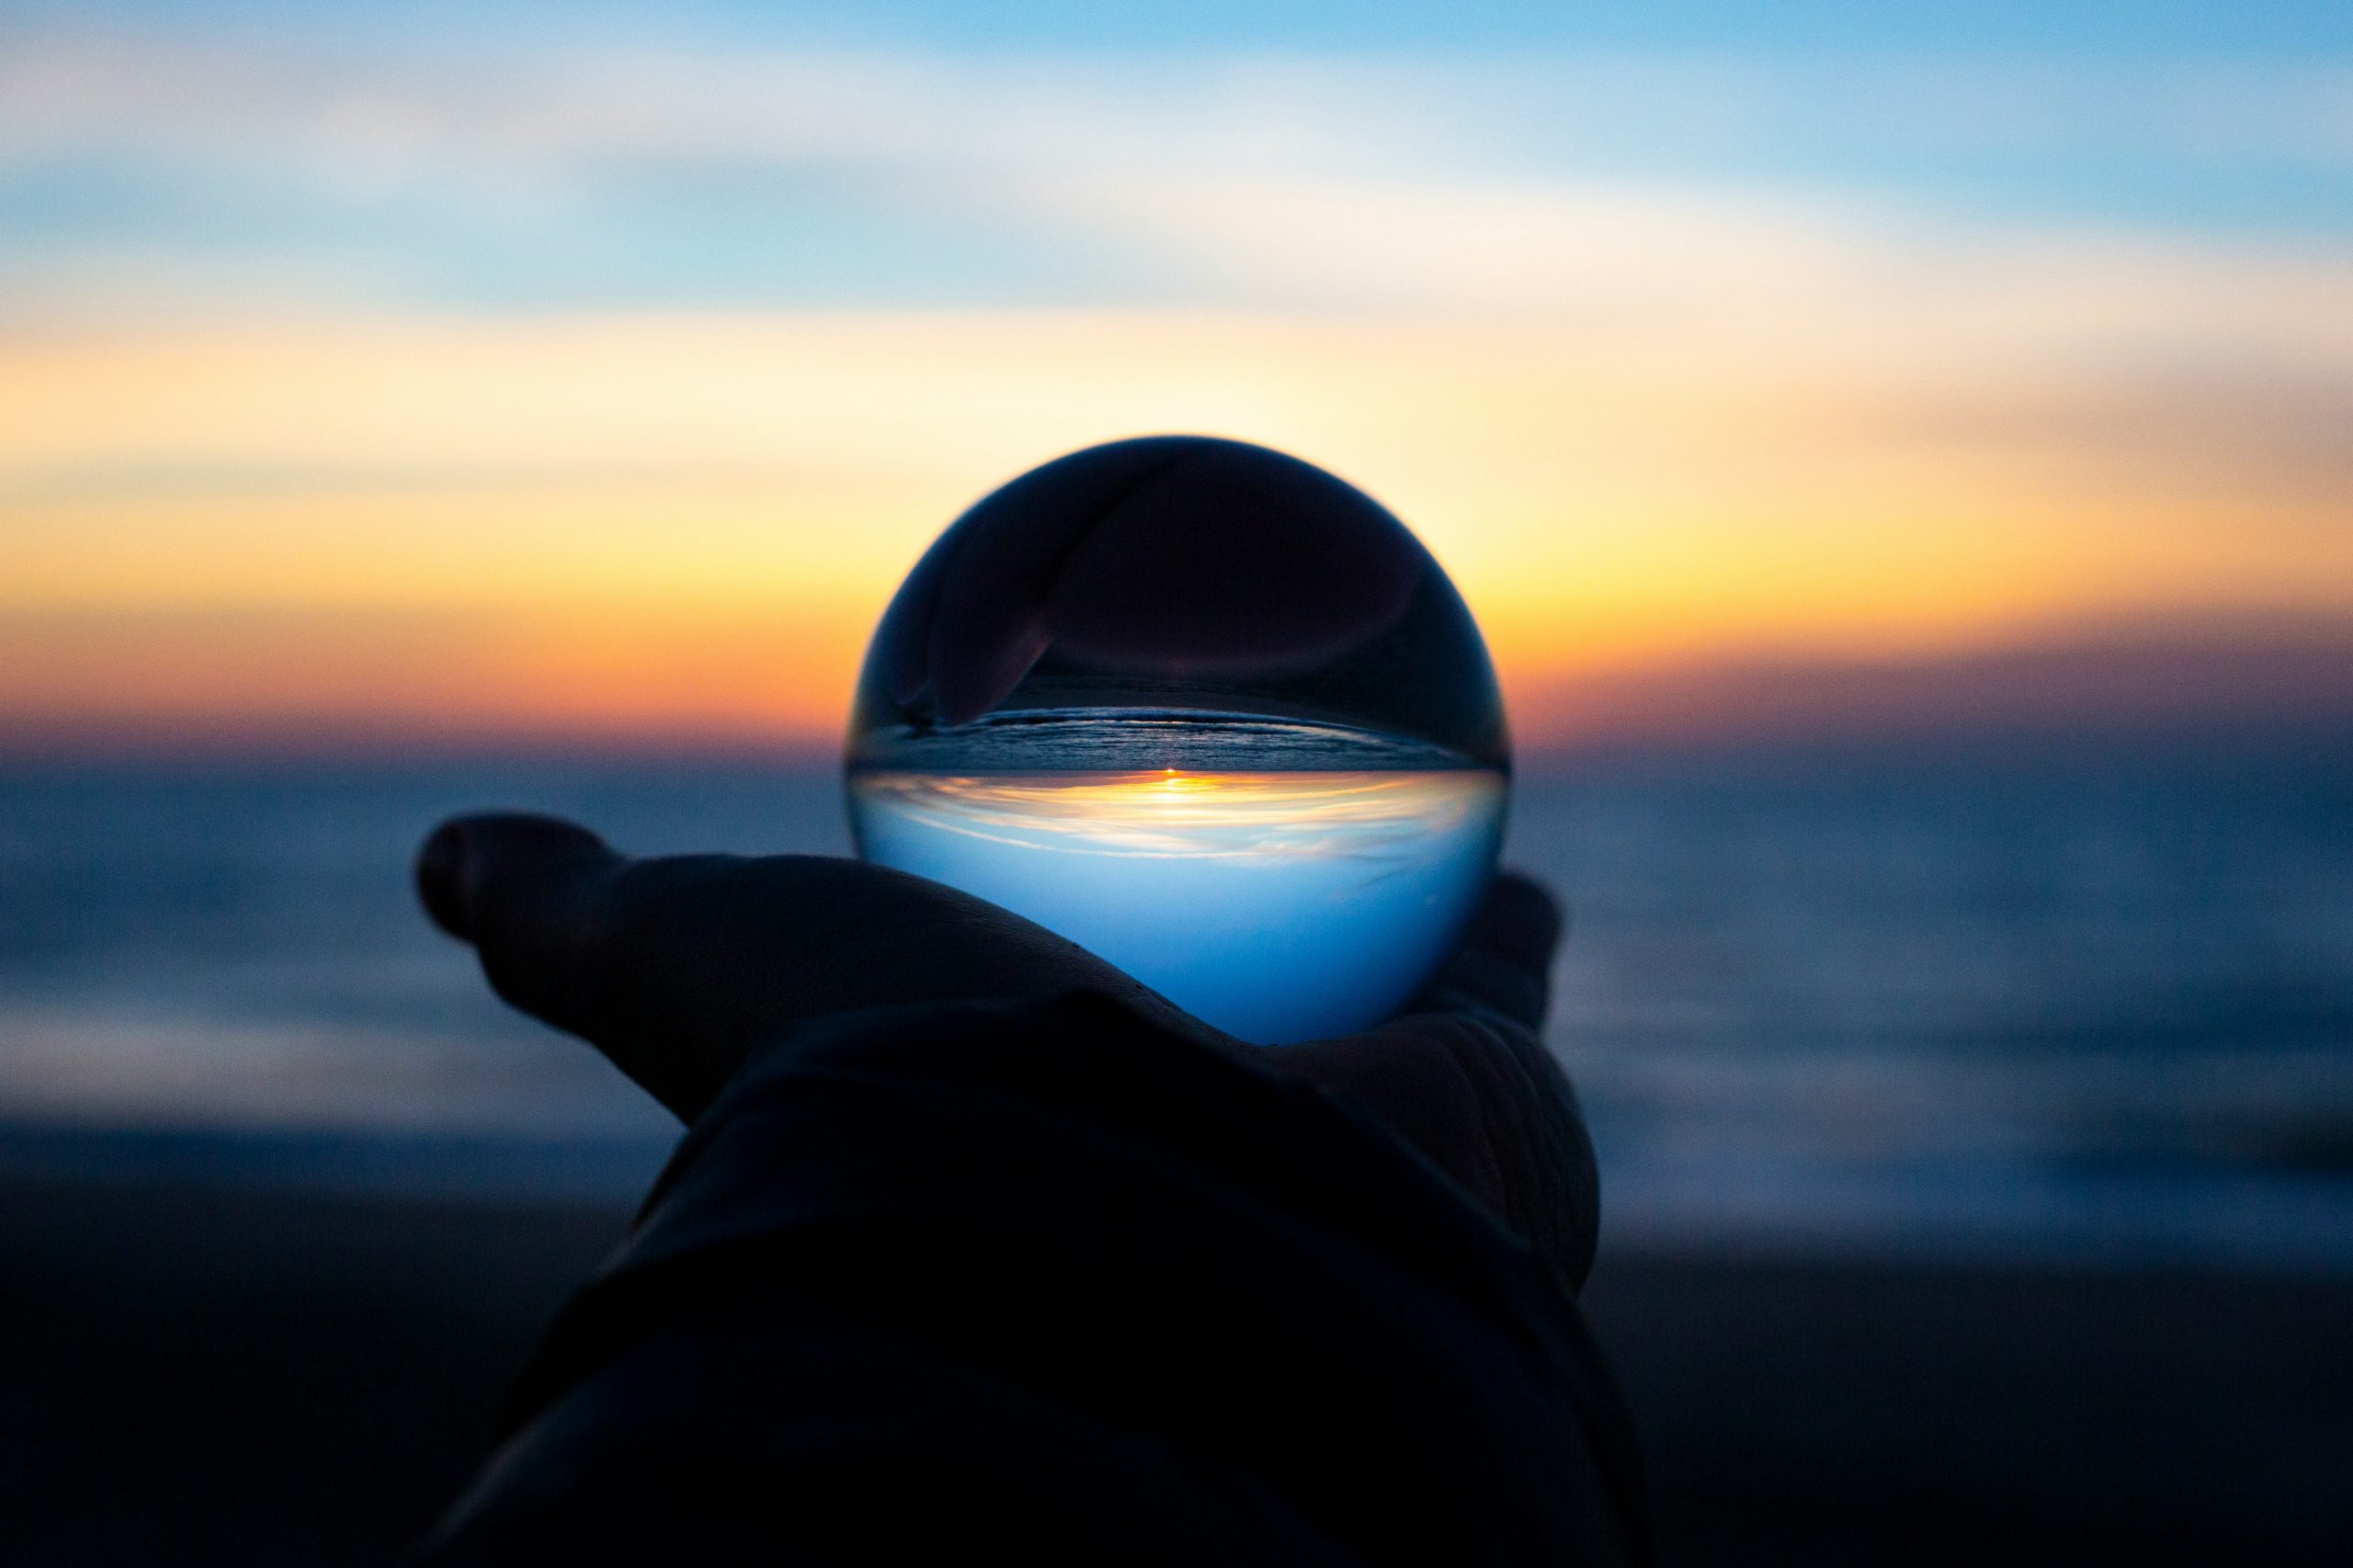 hand holding a crystal ball up to a sunrise, showing a reverse image within